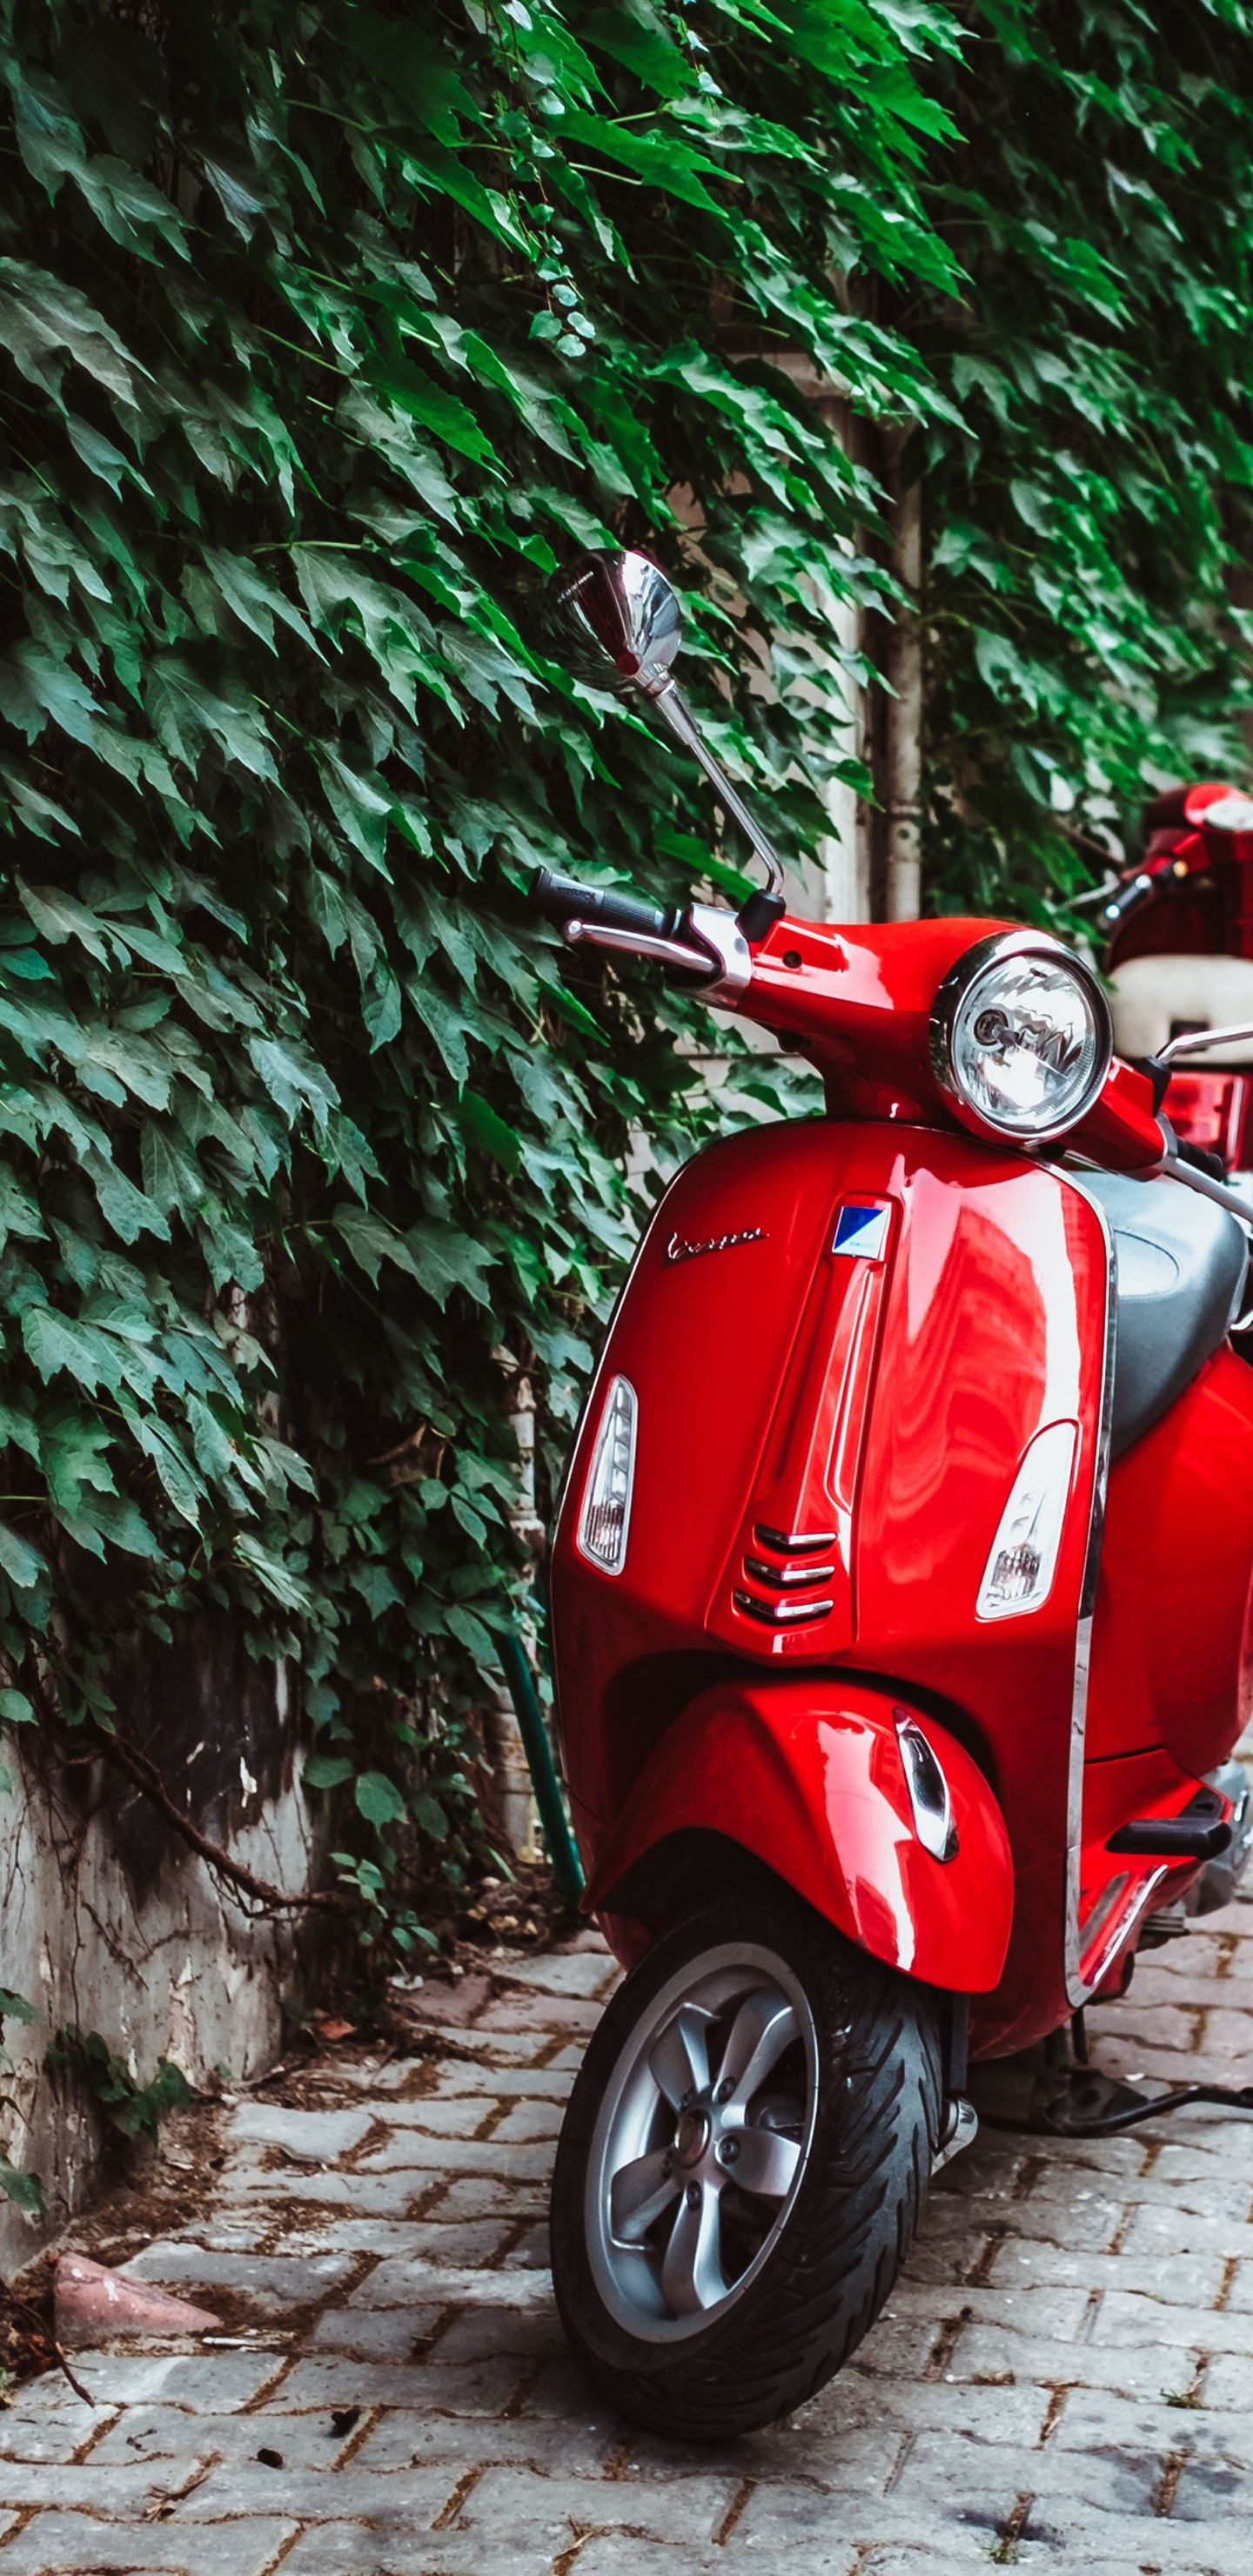 1440x2960 Download red vespa, scooter wallpaper, samsung galaxy s8, samsung galaxy s8 plus, hd image, background, 19679